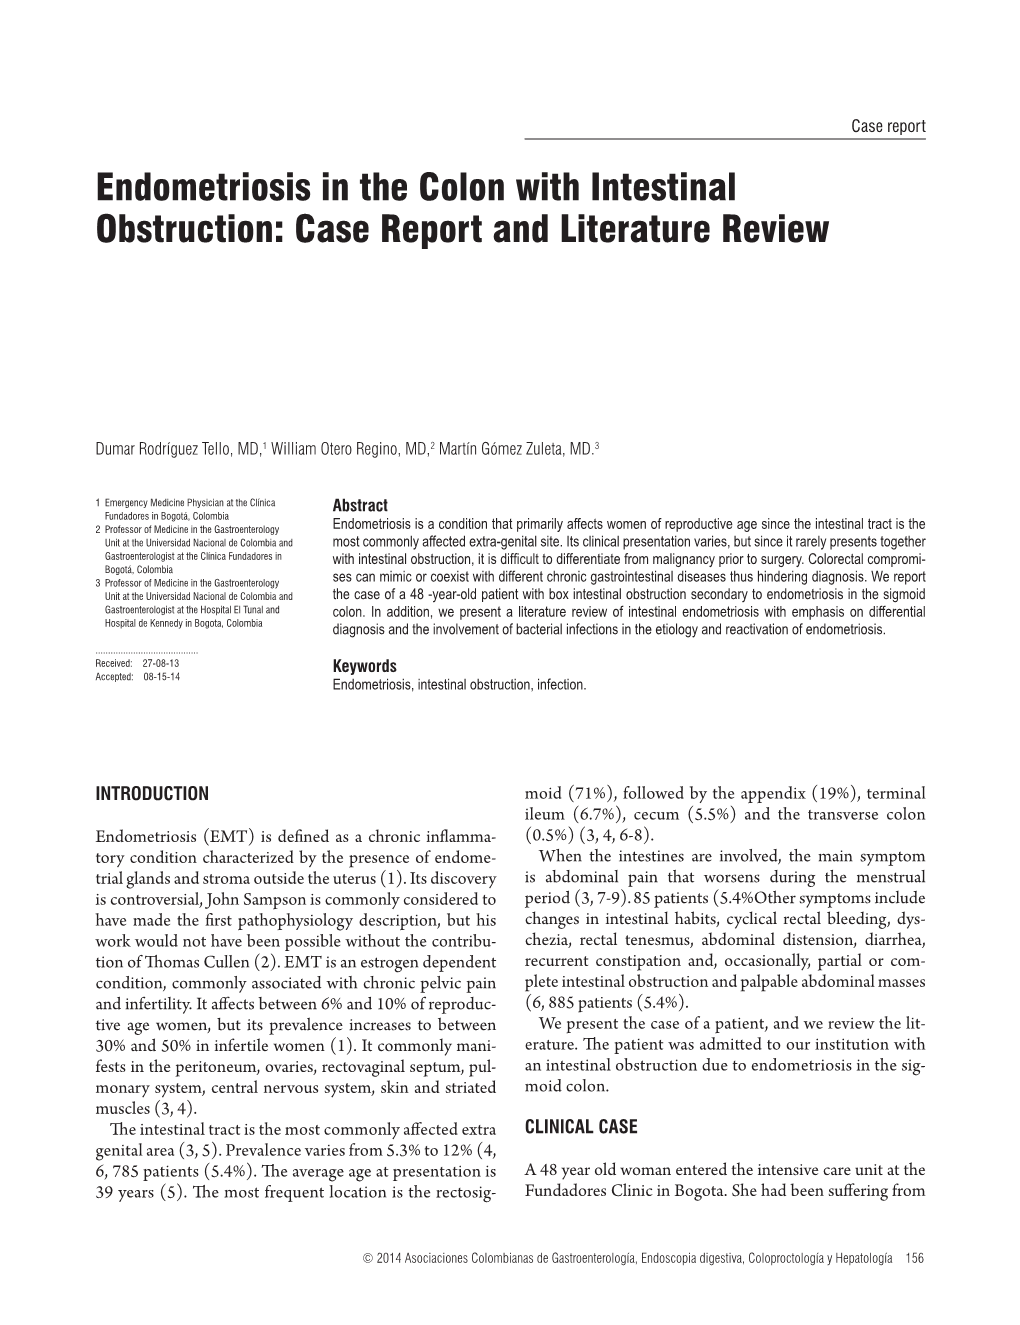 Endometriosis in the Colon with Intestinal Obstruction: Case Report and Literature Review